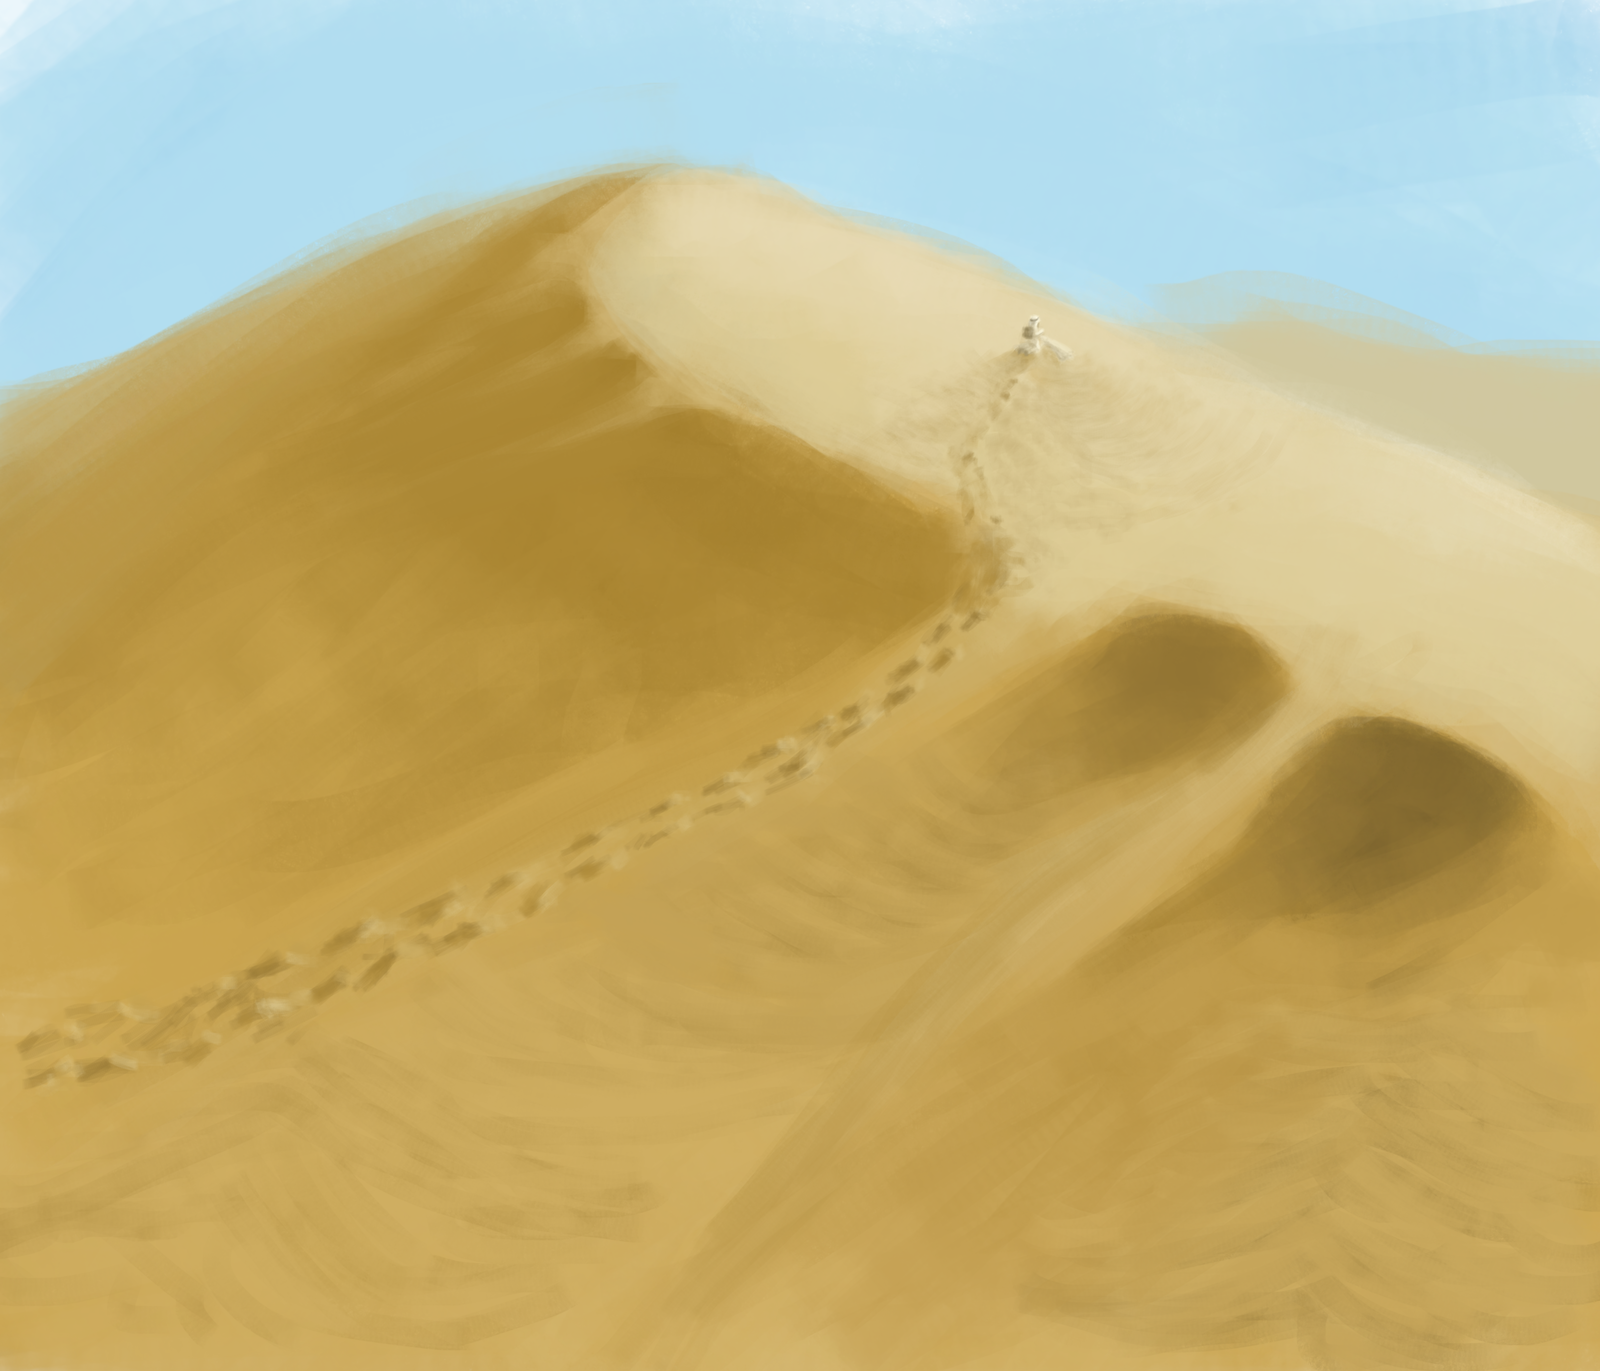 Absolute loneliness - My, Drawing, Digital drawing, Desert, Death